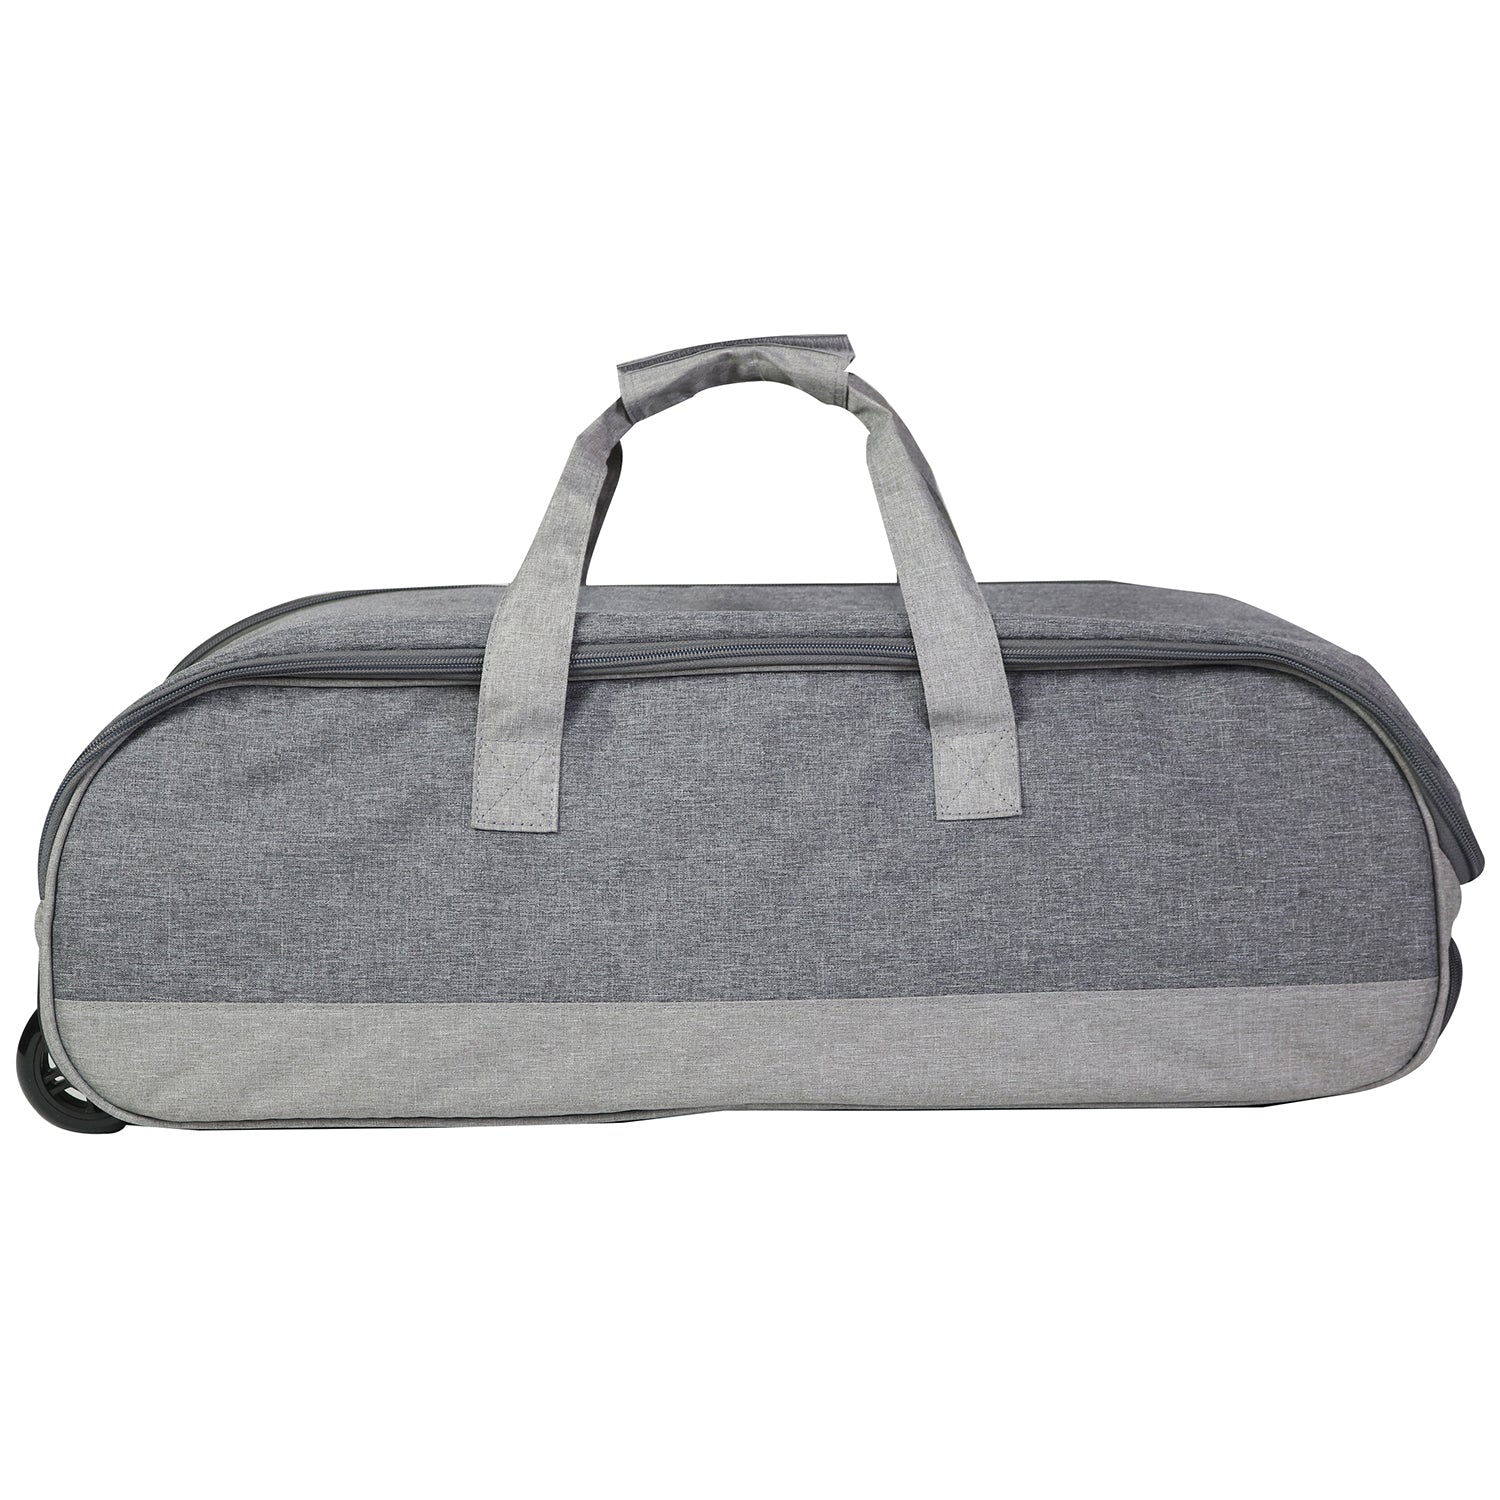 Rolling Tote, Lightweight Collapsible Craft Bag- Black and Gray